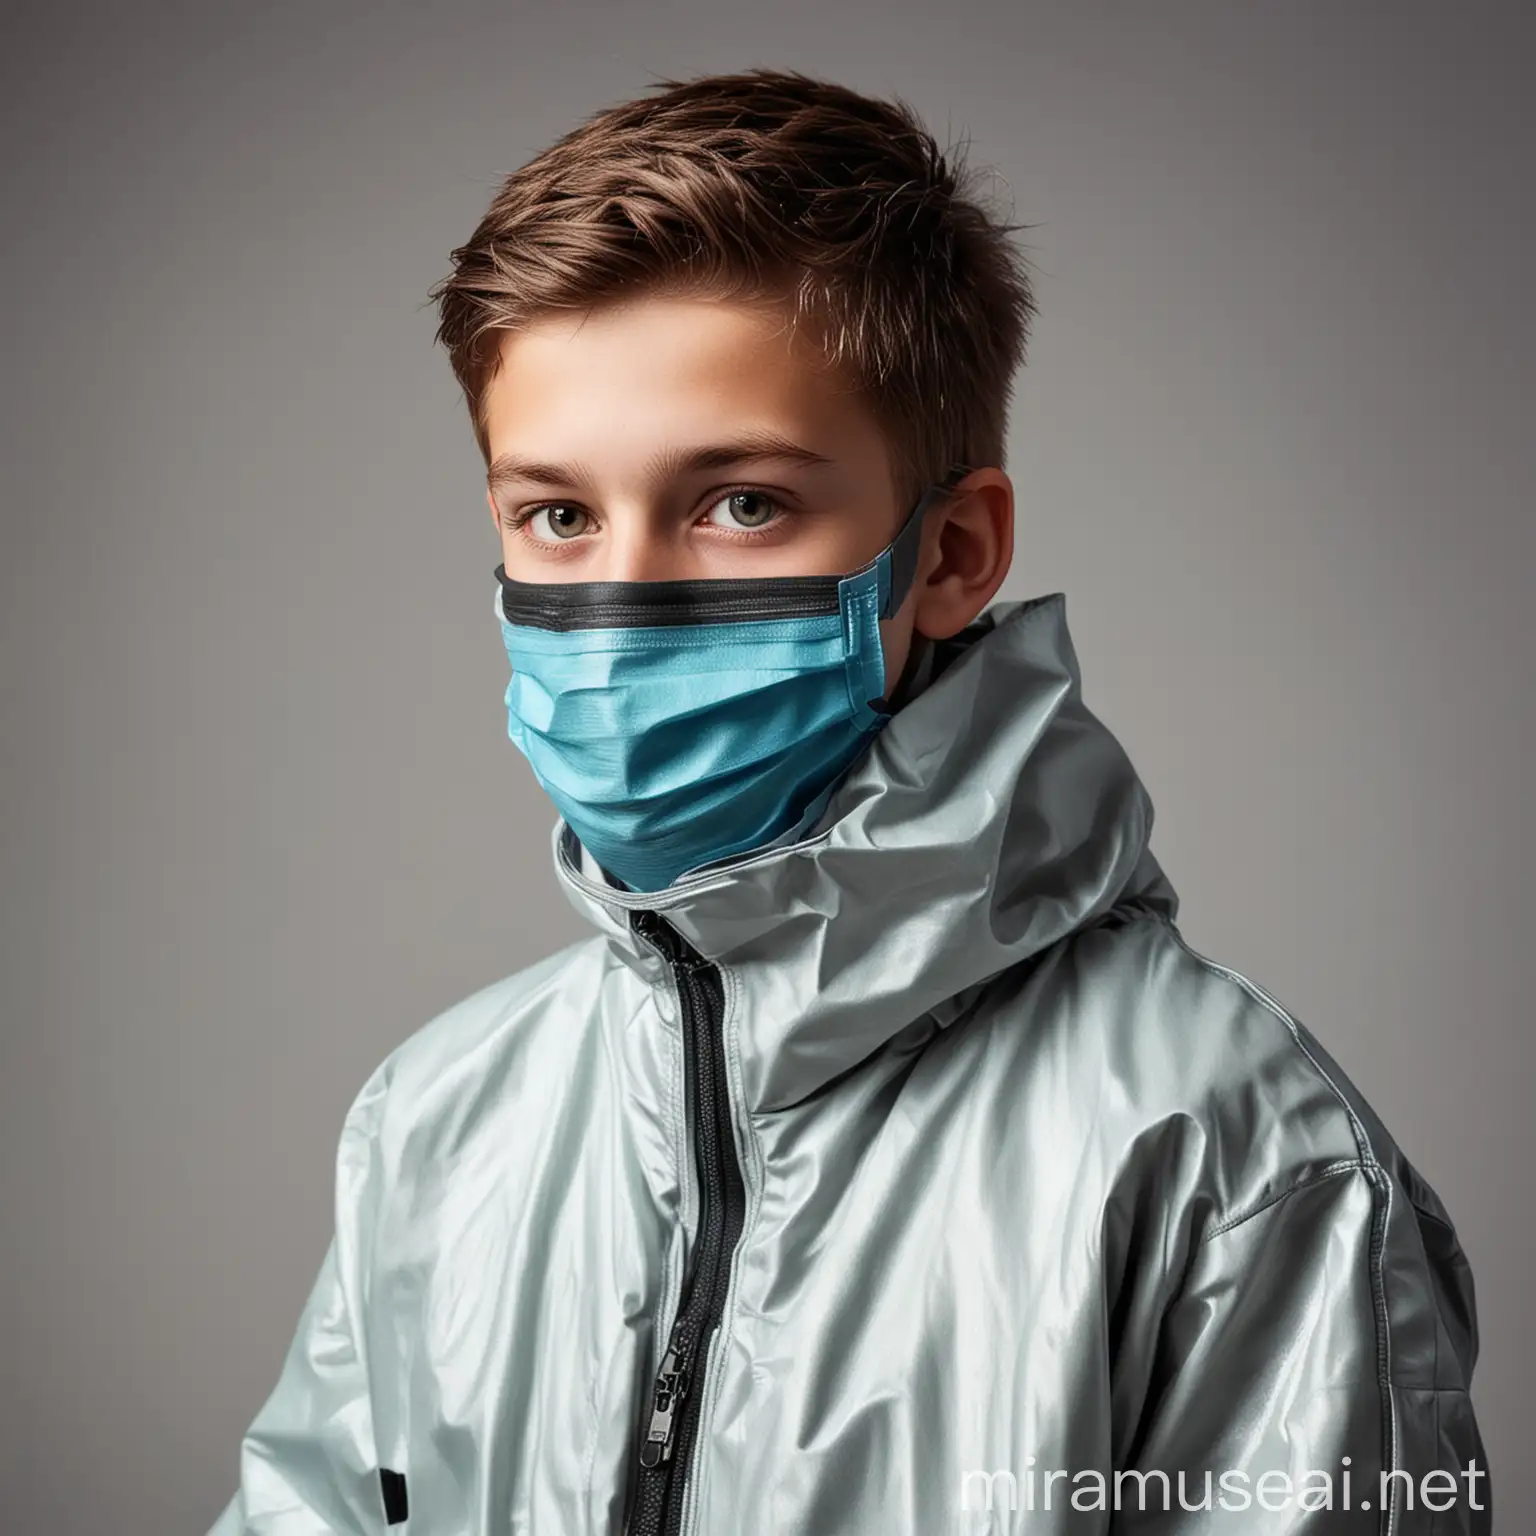 Teenage Boy in Protective Suit Engaged in Science Experiment